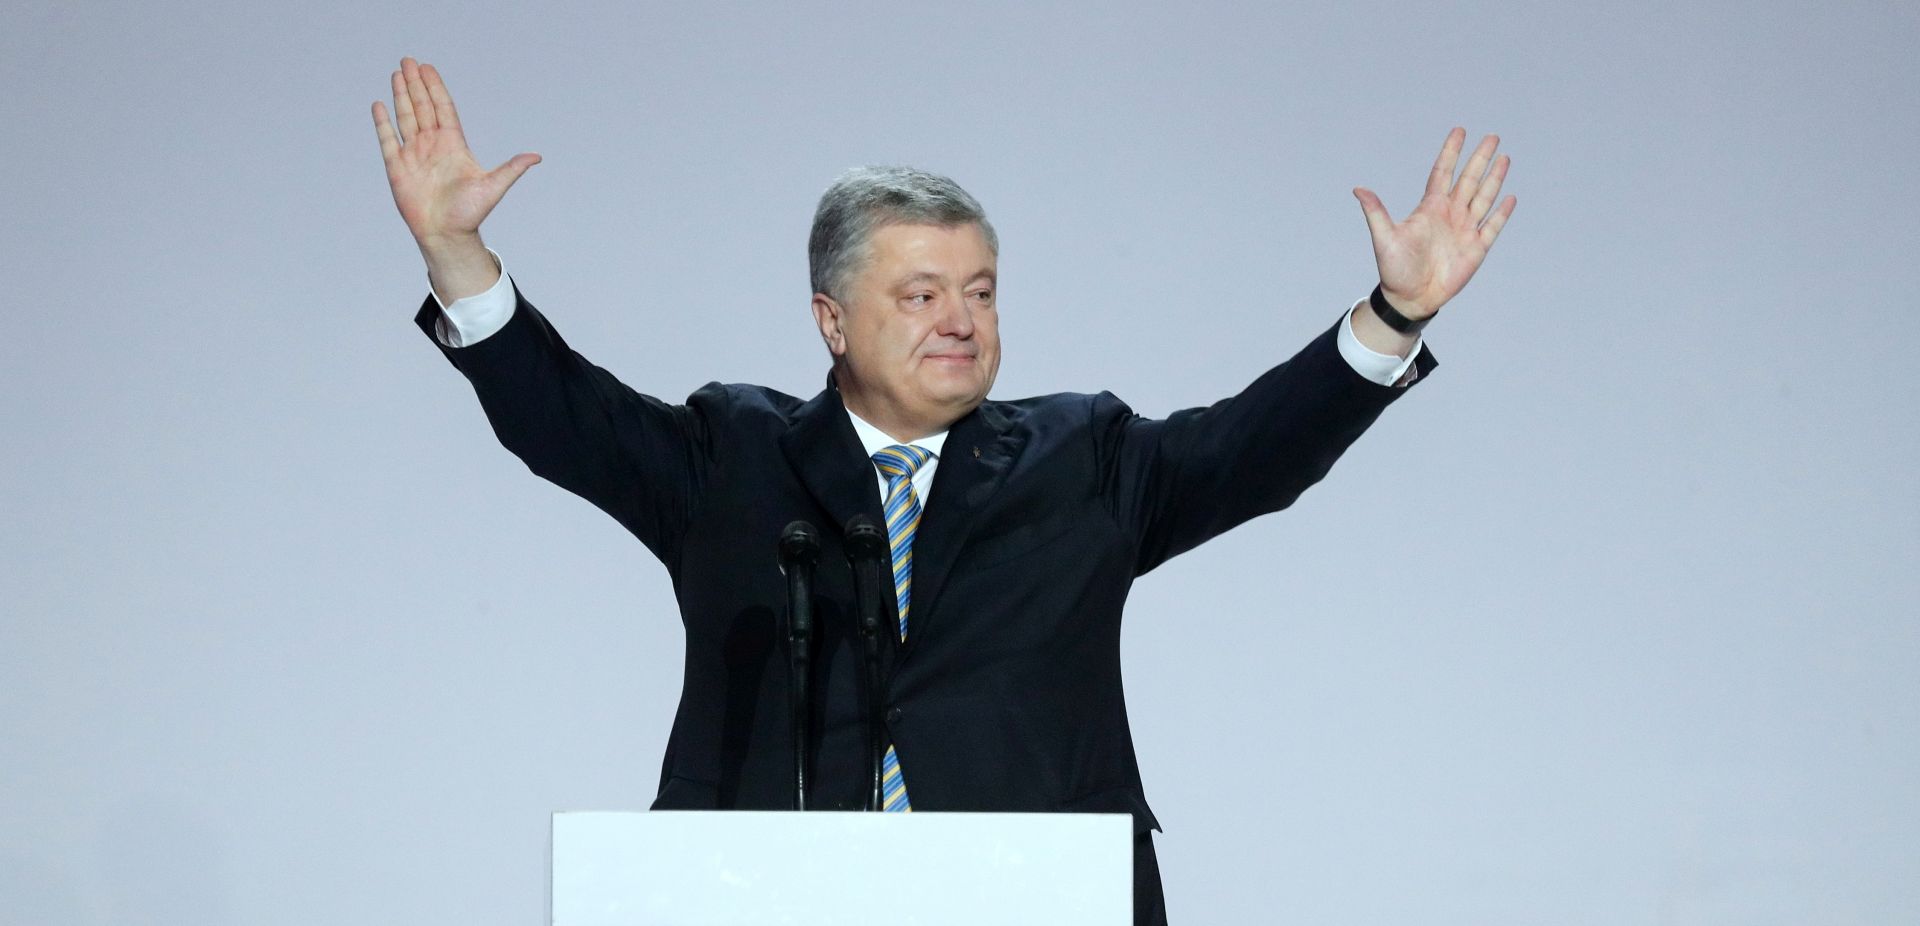 epa07329512 Ukrainian President Petro Poroshenko reacts after announcing his decision to be a candidate on the next Presidential elections in Kiev, Ukraine, 29 January 2019. The next presidential elections will take place in Ukraine on 31 March 2019.  EPA/SERGEY DOLZHENKO